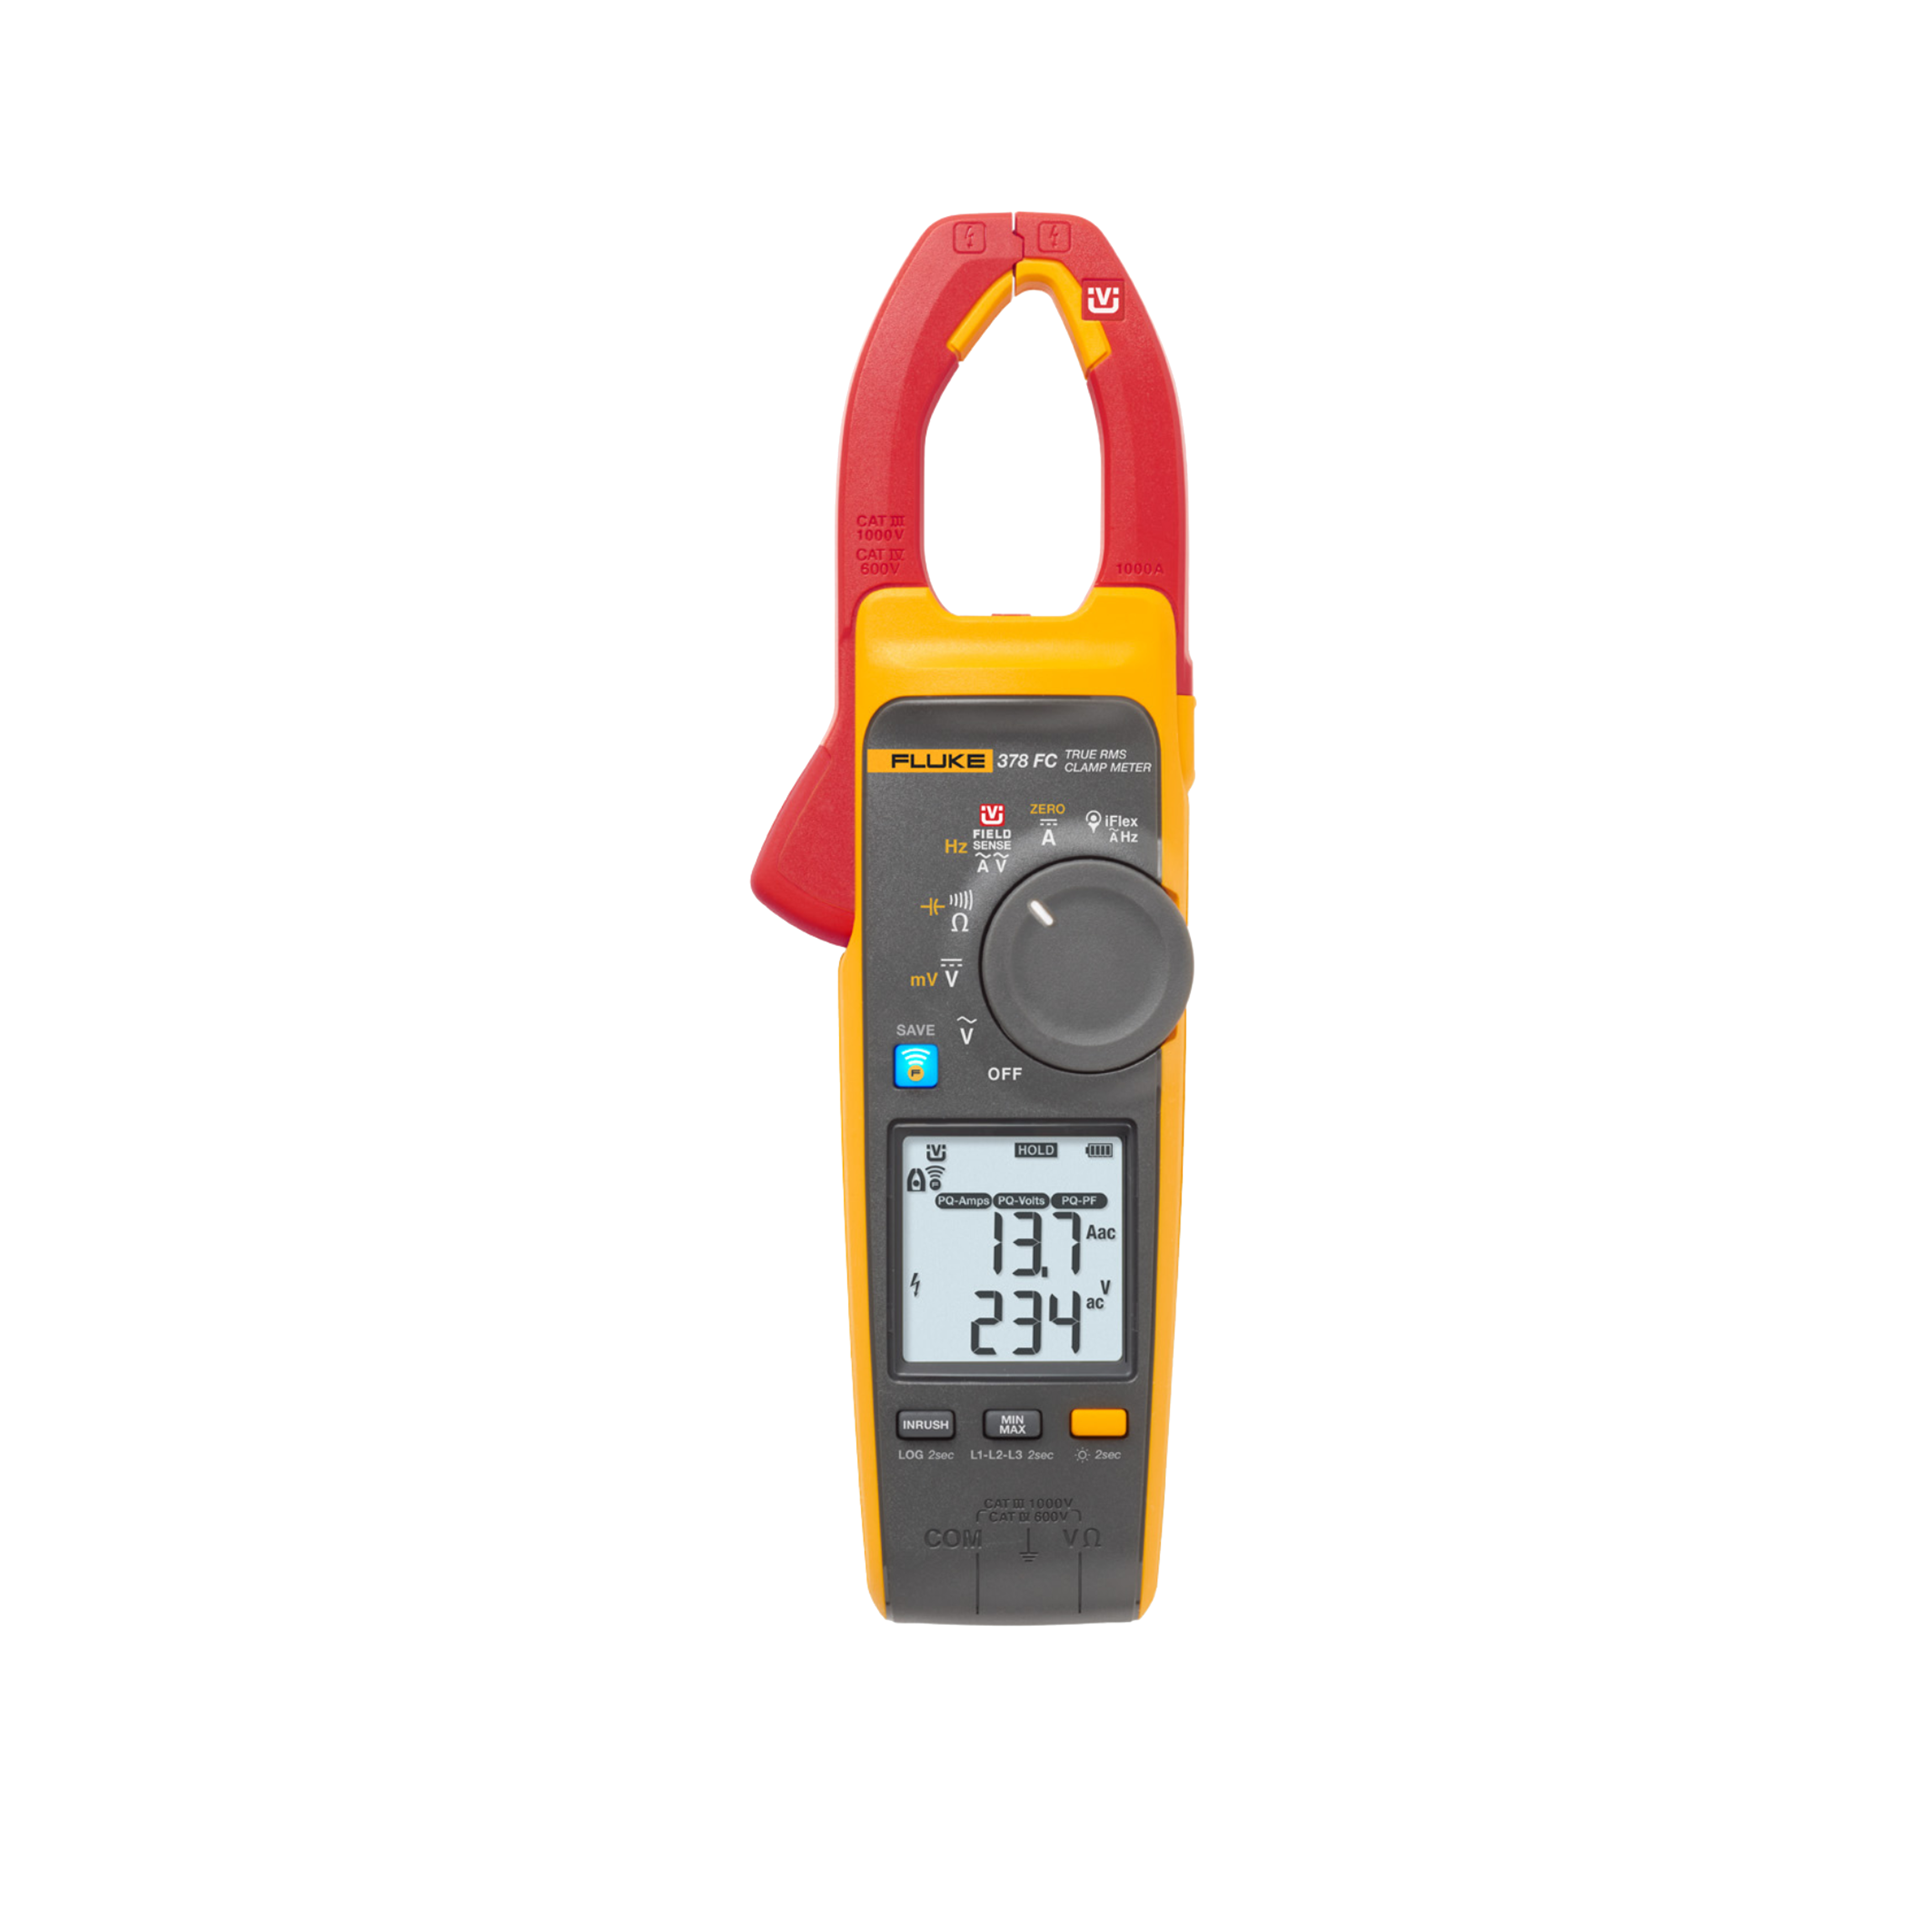 Fluke 378 FC Current Clamp Meter with iFlex